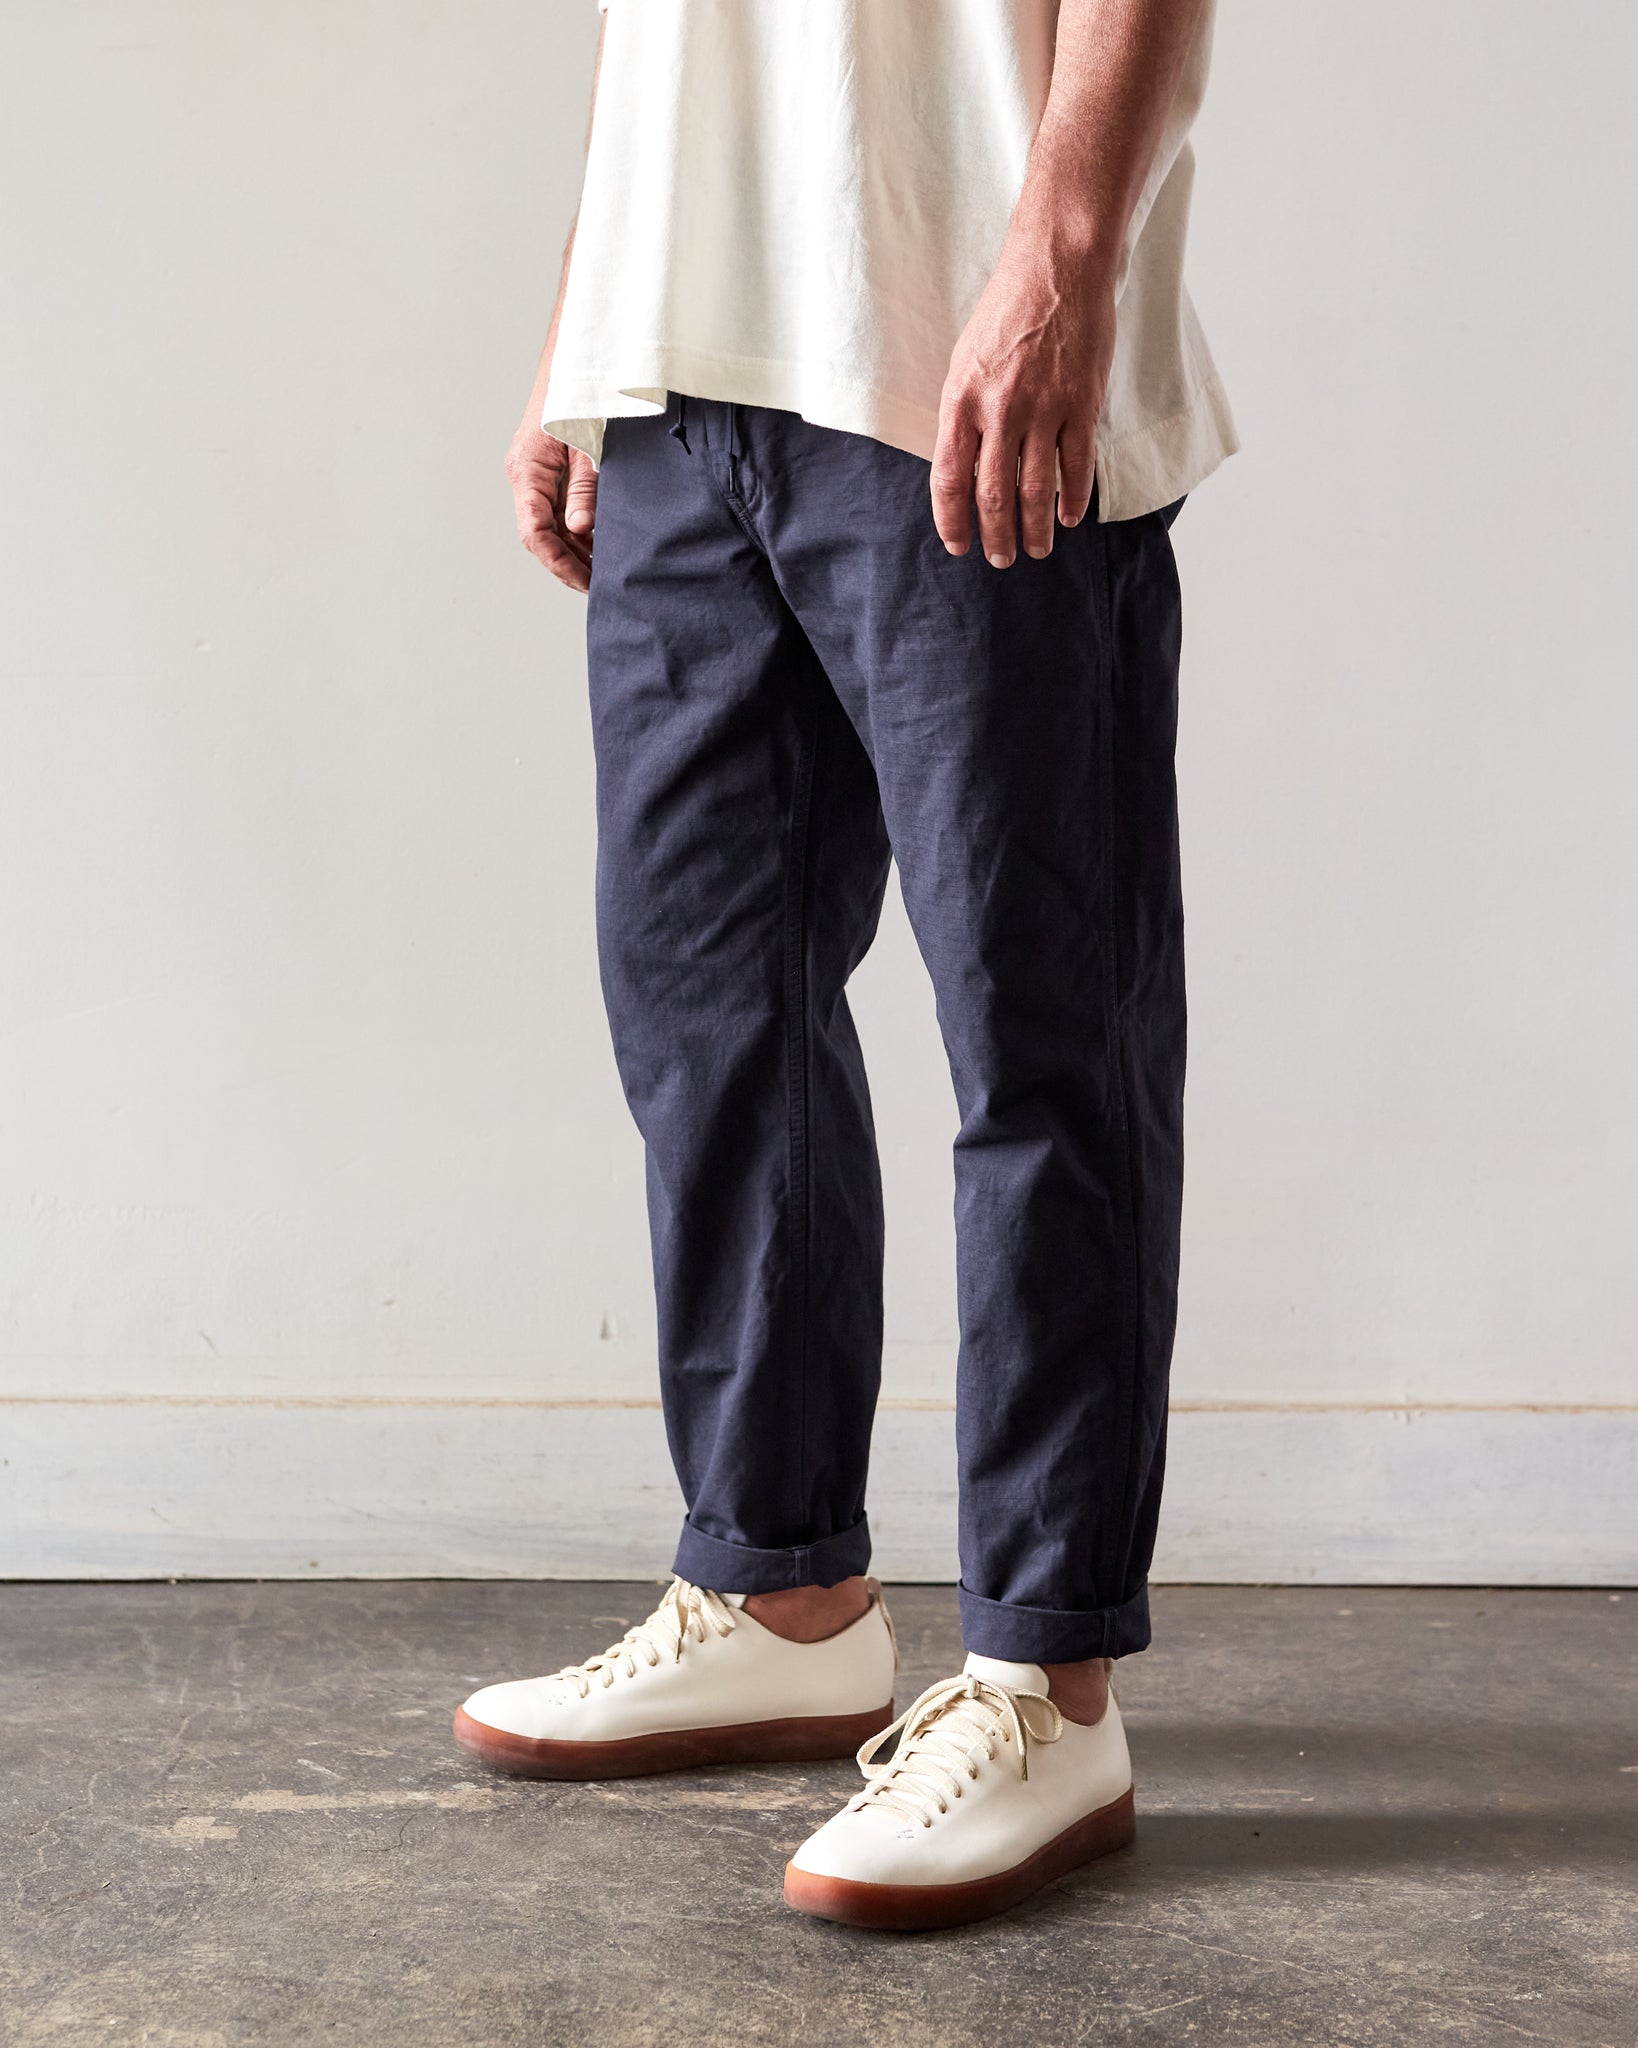 OrSlow Ripstop New Yorker Pant, Navy